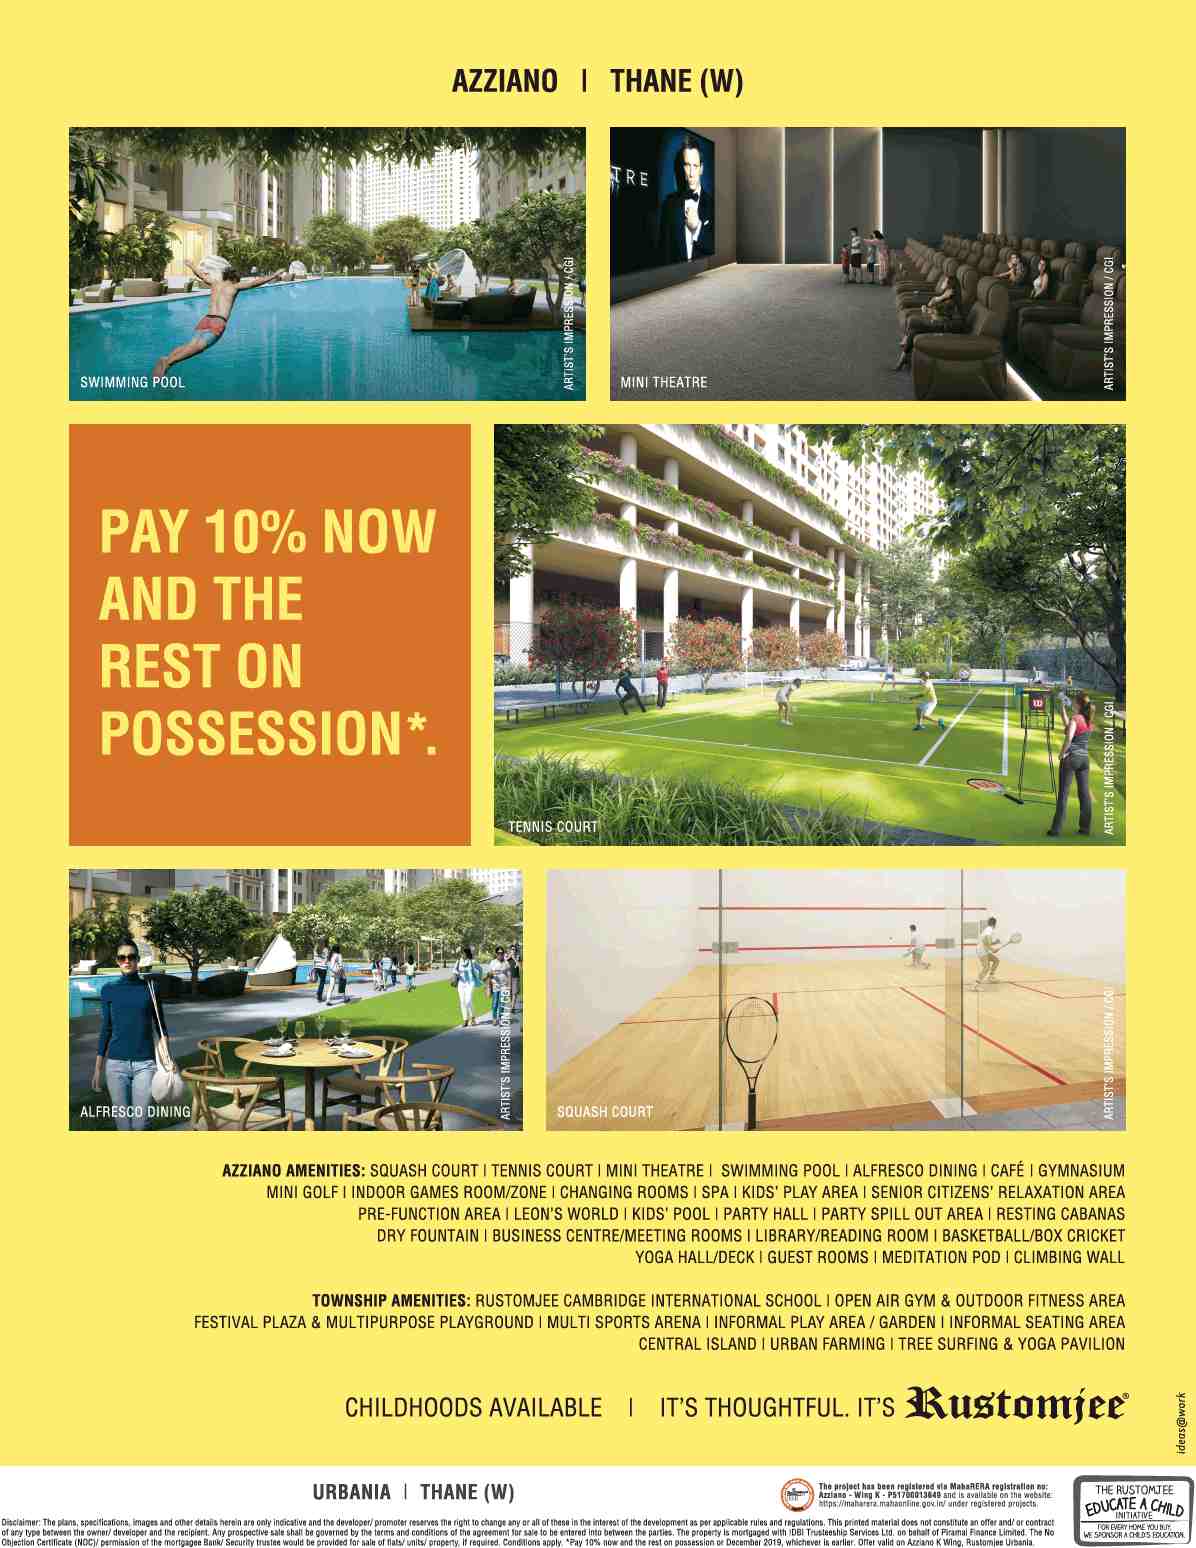 Pay 10% and the rest on possession Rustomjee Azziano in Mumbai Update